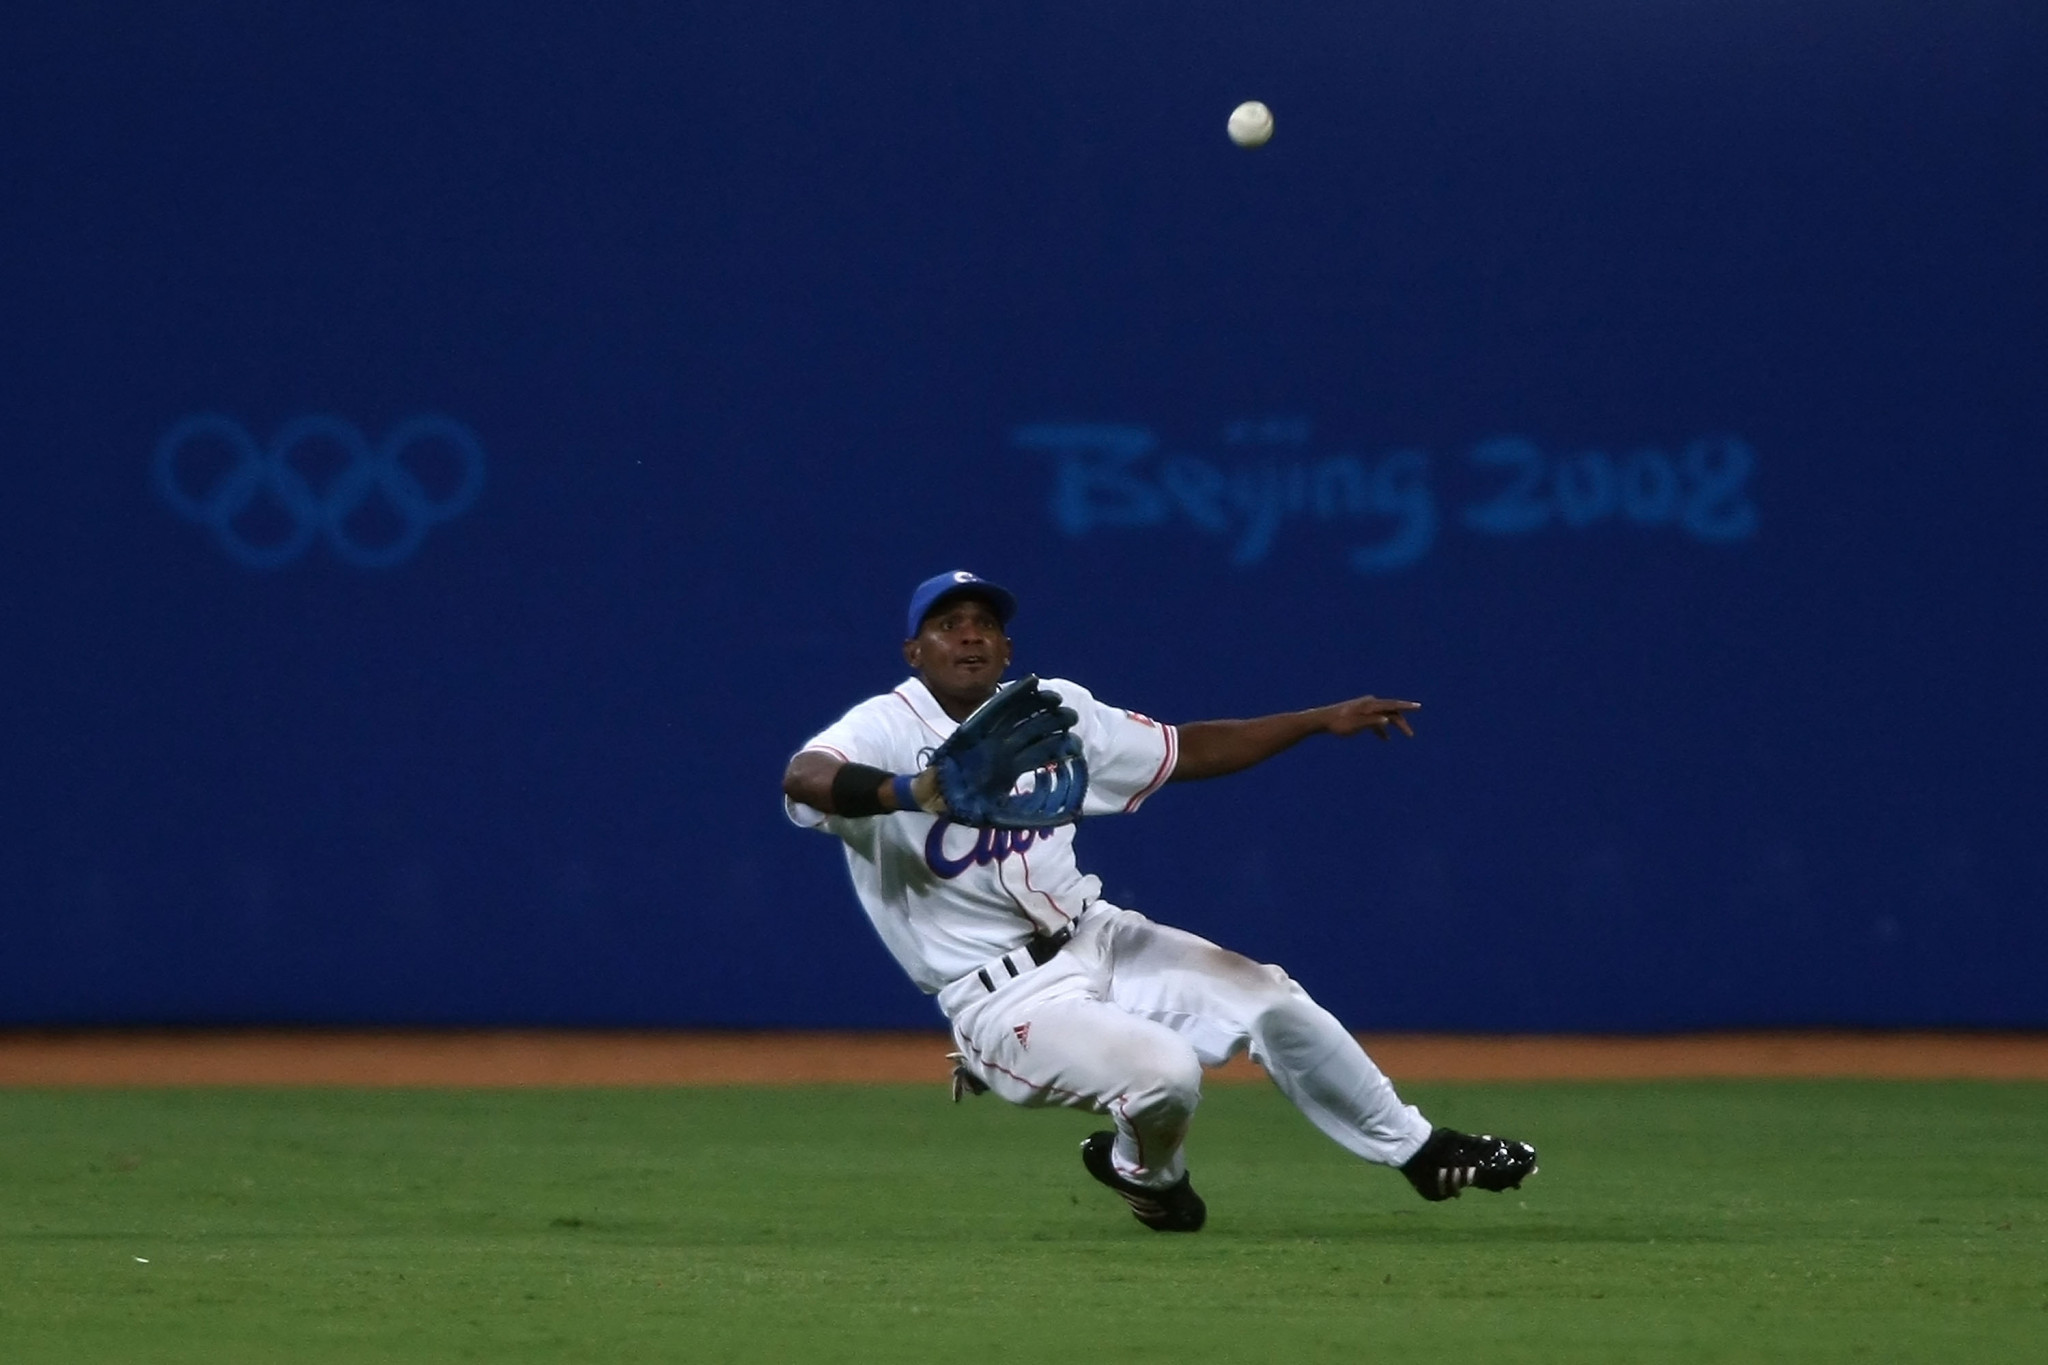 Baseball, pictured, and softball will make their return to the Olympics at Tokyo 2020 for the first time since Beijing 2008 ©Getty Images